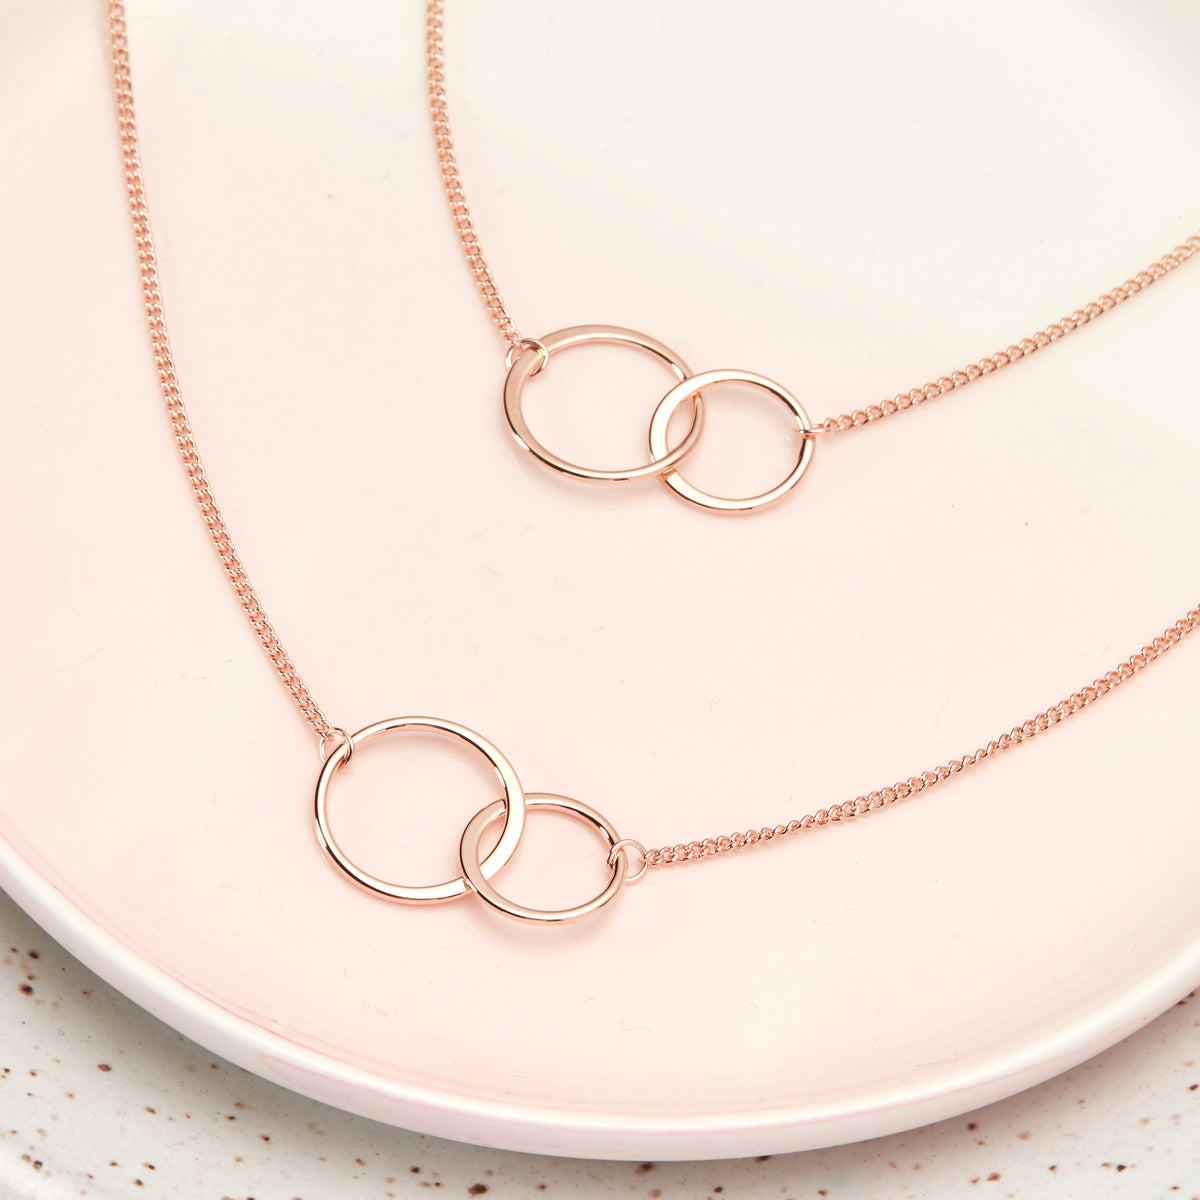 Godmother-Goddaughter Double Circles Necklace Set